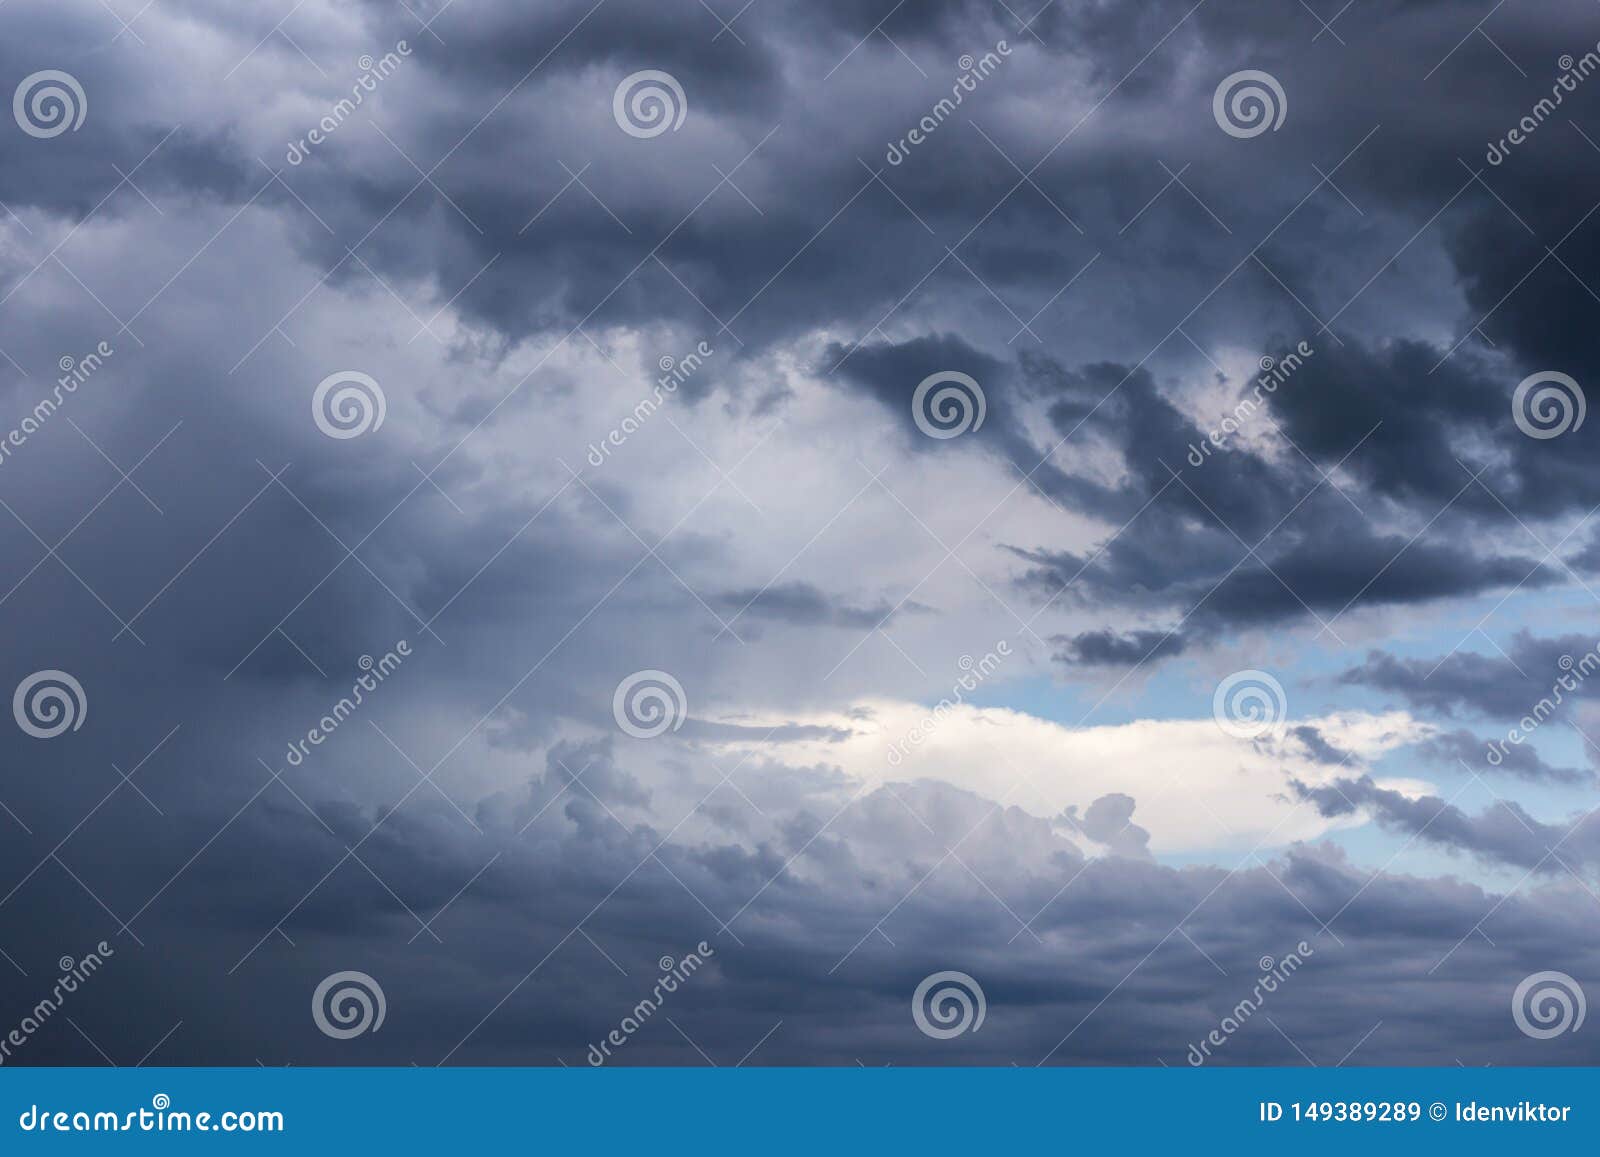 Cumulus Epic Storm Clouds Texture In The Blue Sky Background Stock Image Image Of Skies Grandiose